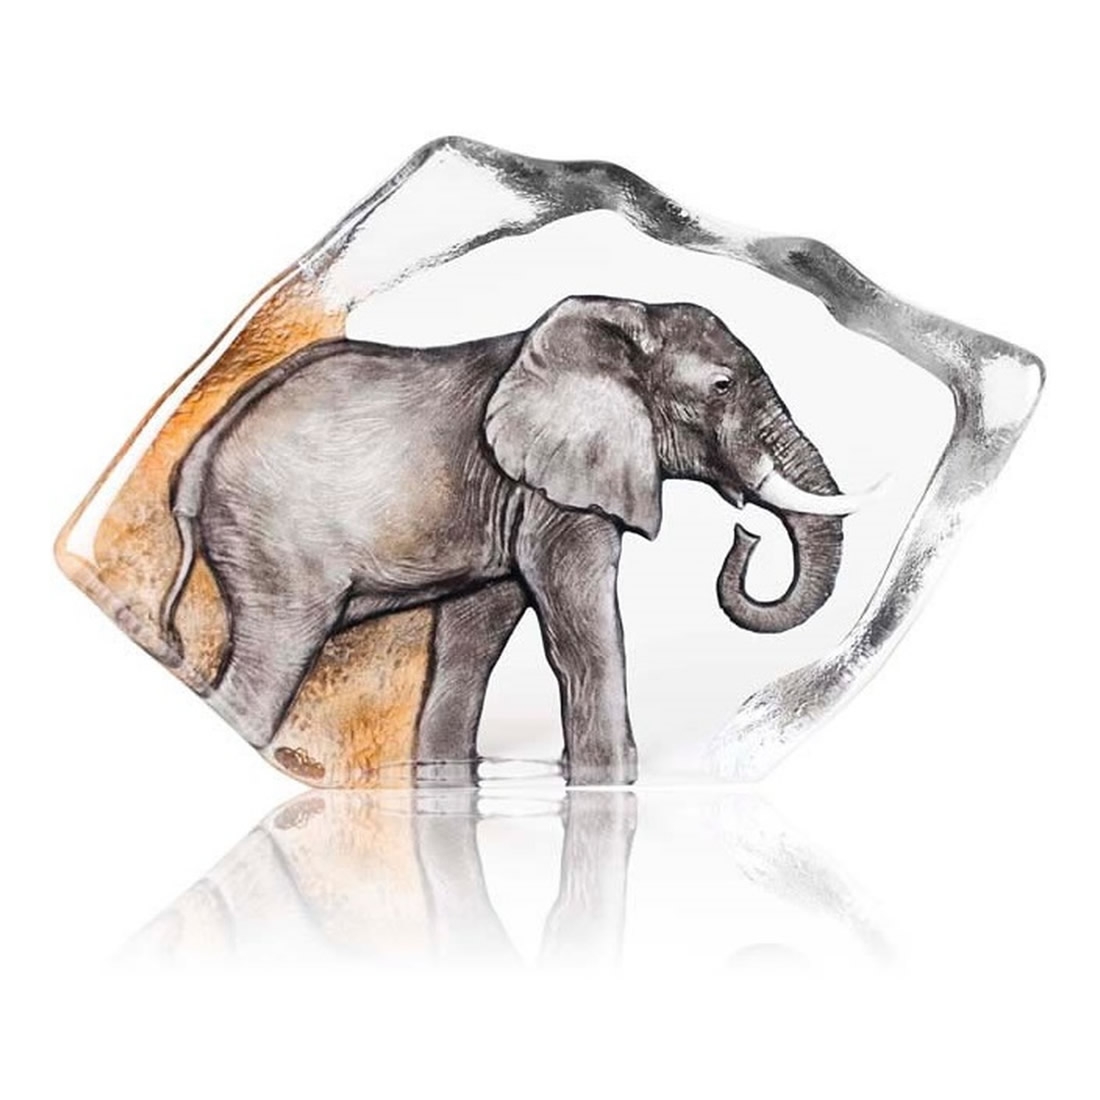 Elephant Crystal Sculpture Limited Edition